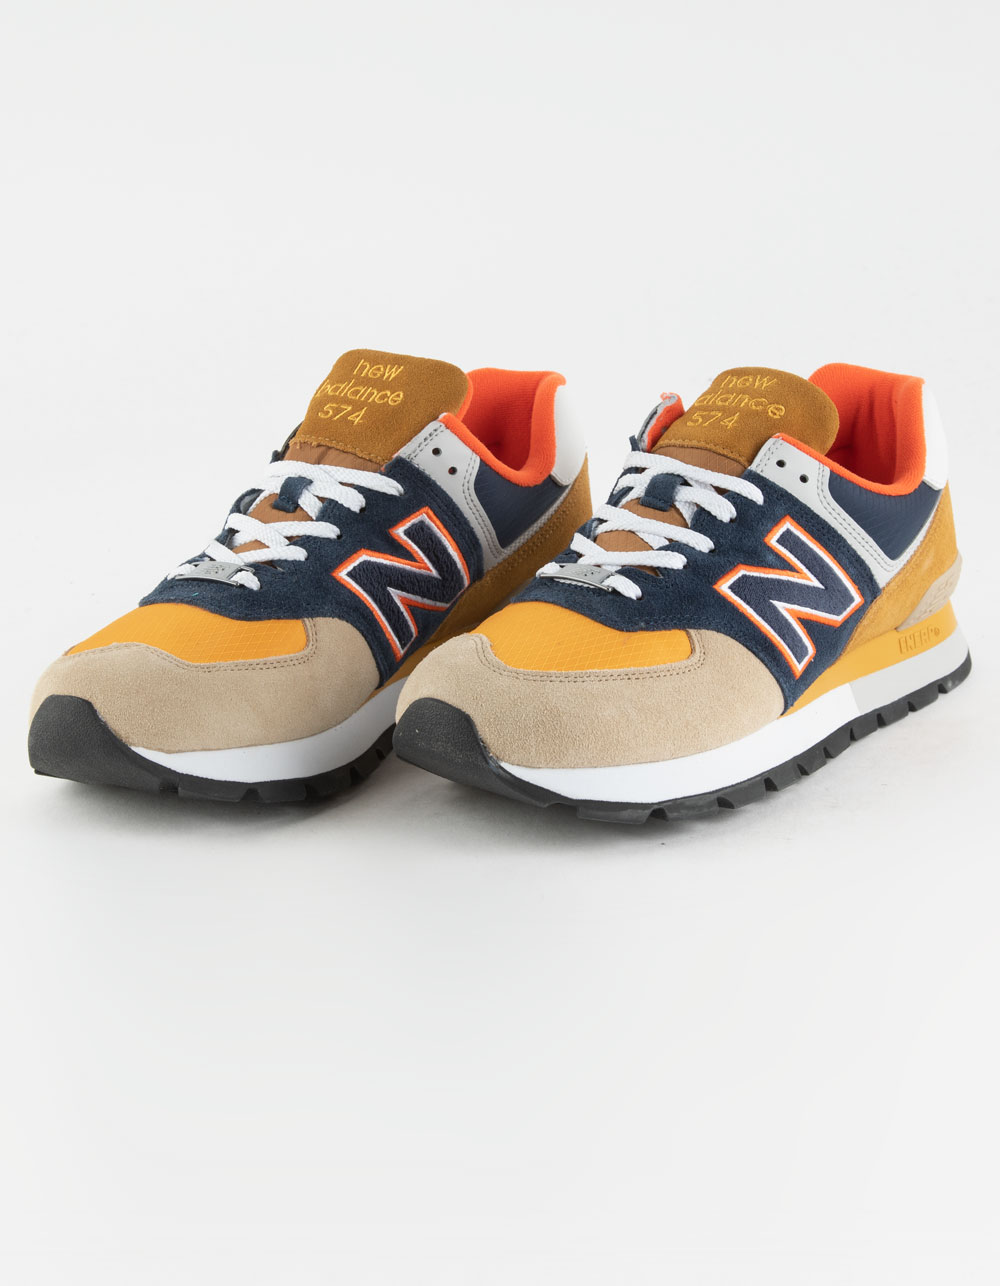 NEW BALANCE 574 Rugged Mens Shoes - BLUE COMBO | Tillys